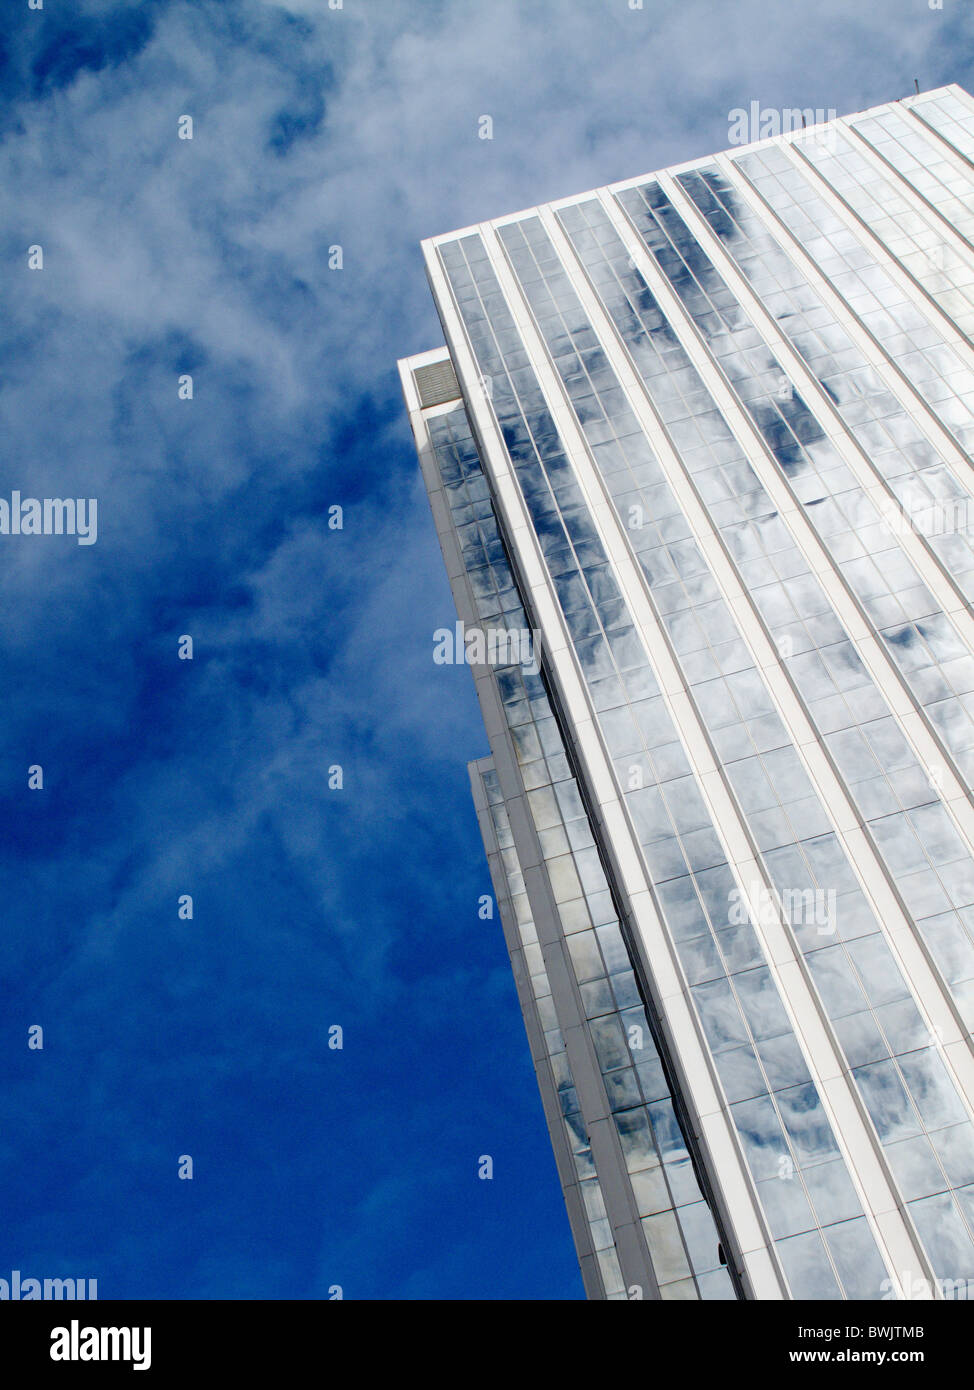 Clouds and sky reflected in the mirror surface of a skyscraper  Stock Photo